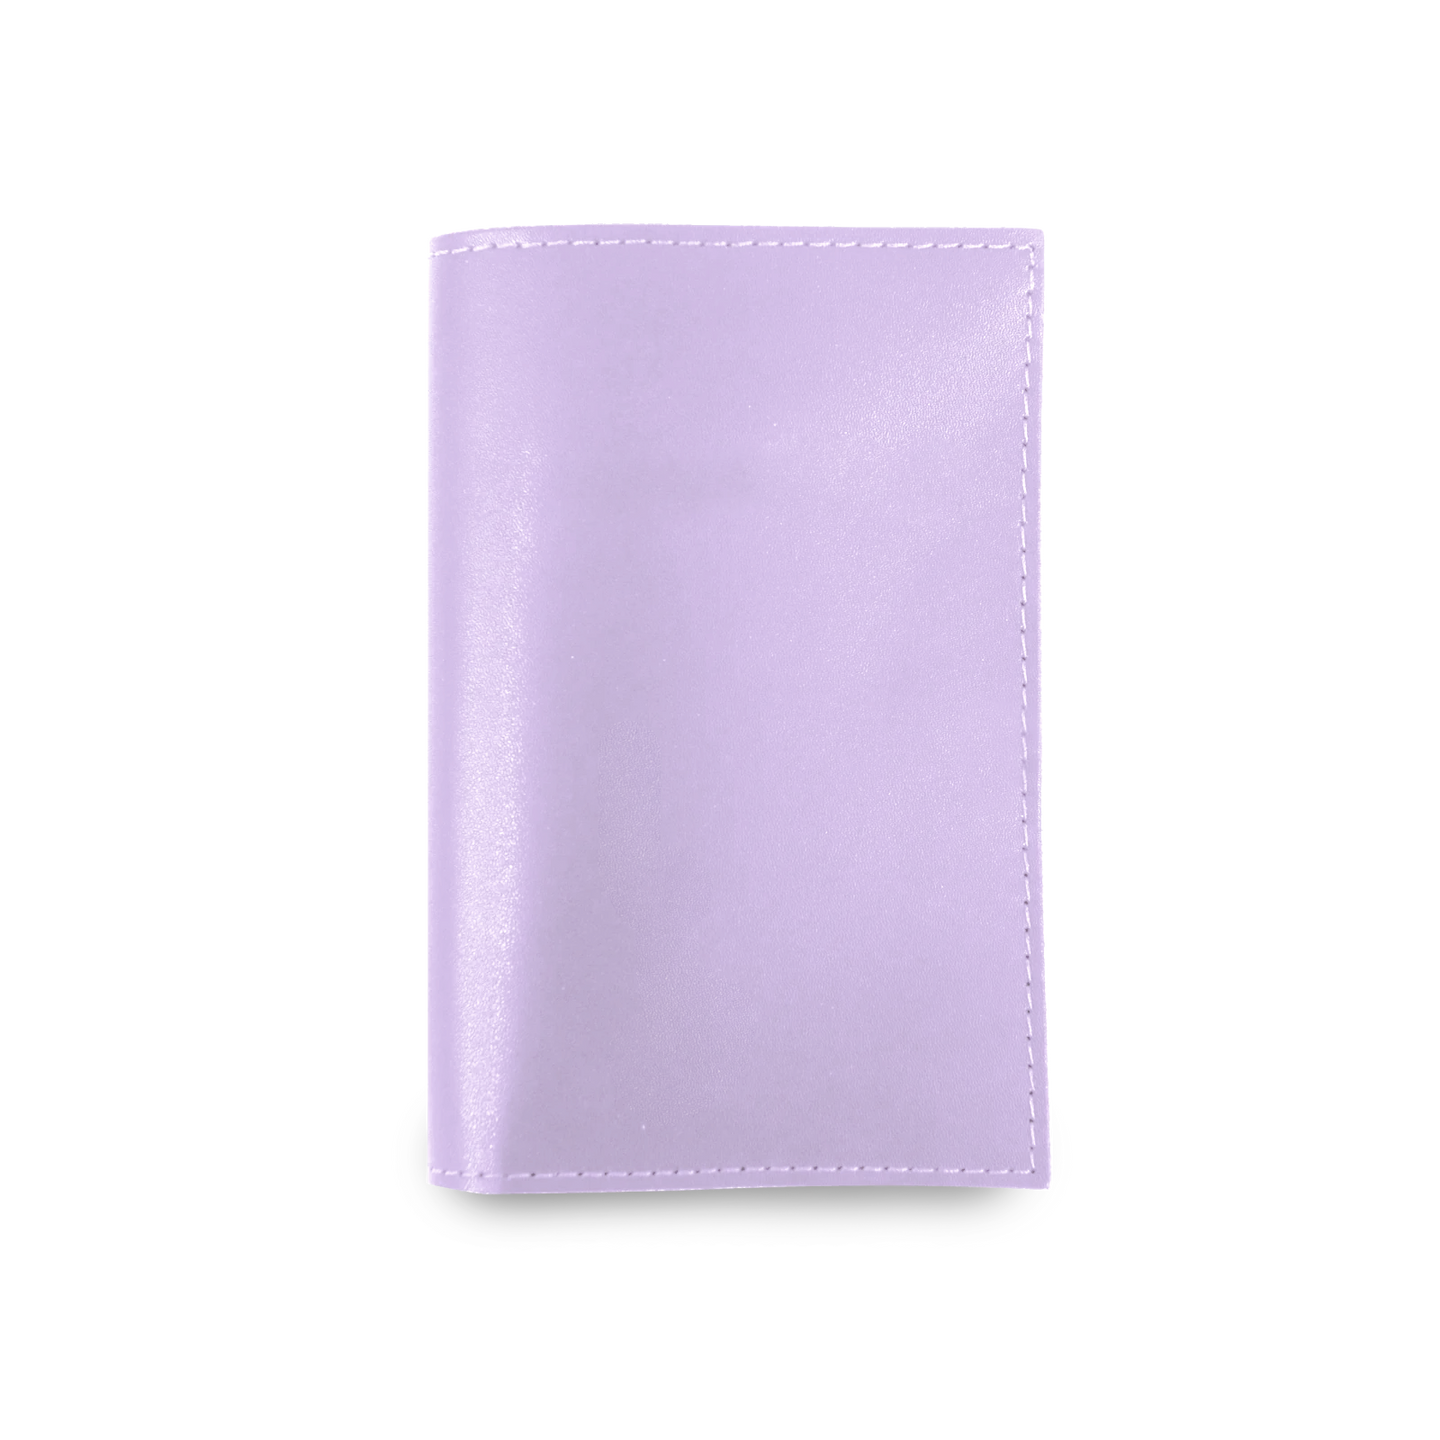 Passport Cover - Iris Leather Front Angle in Color 'Iris Leather'  